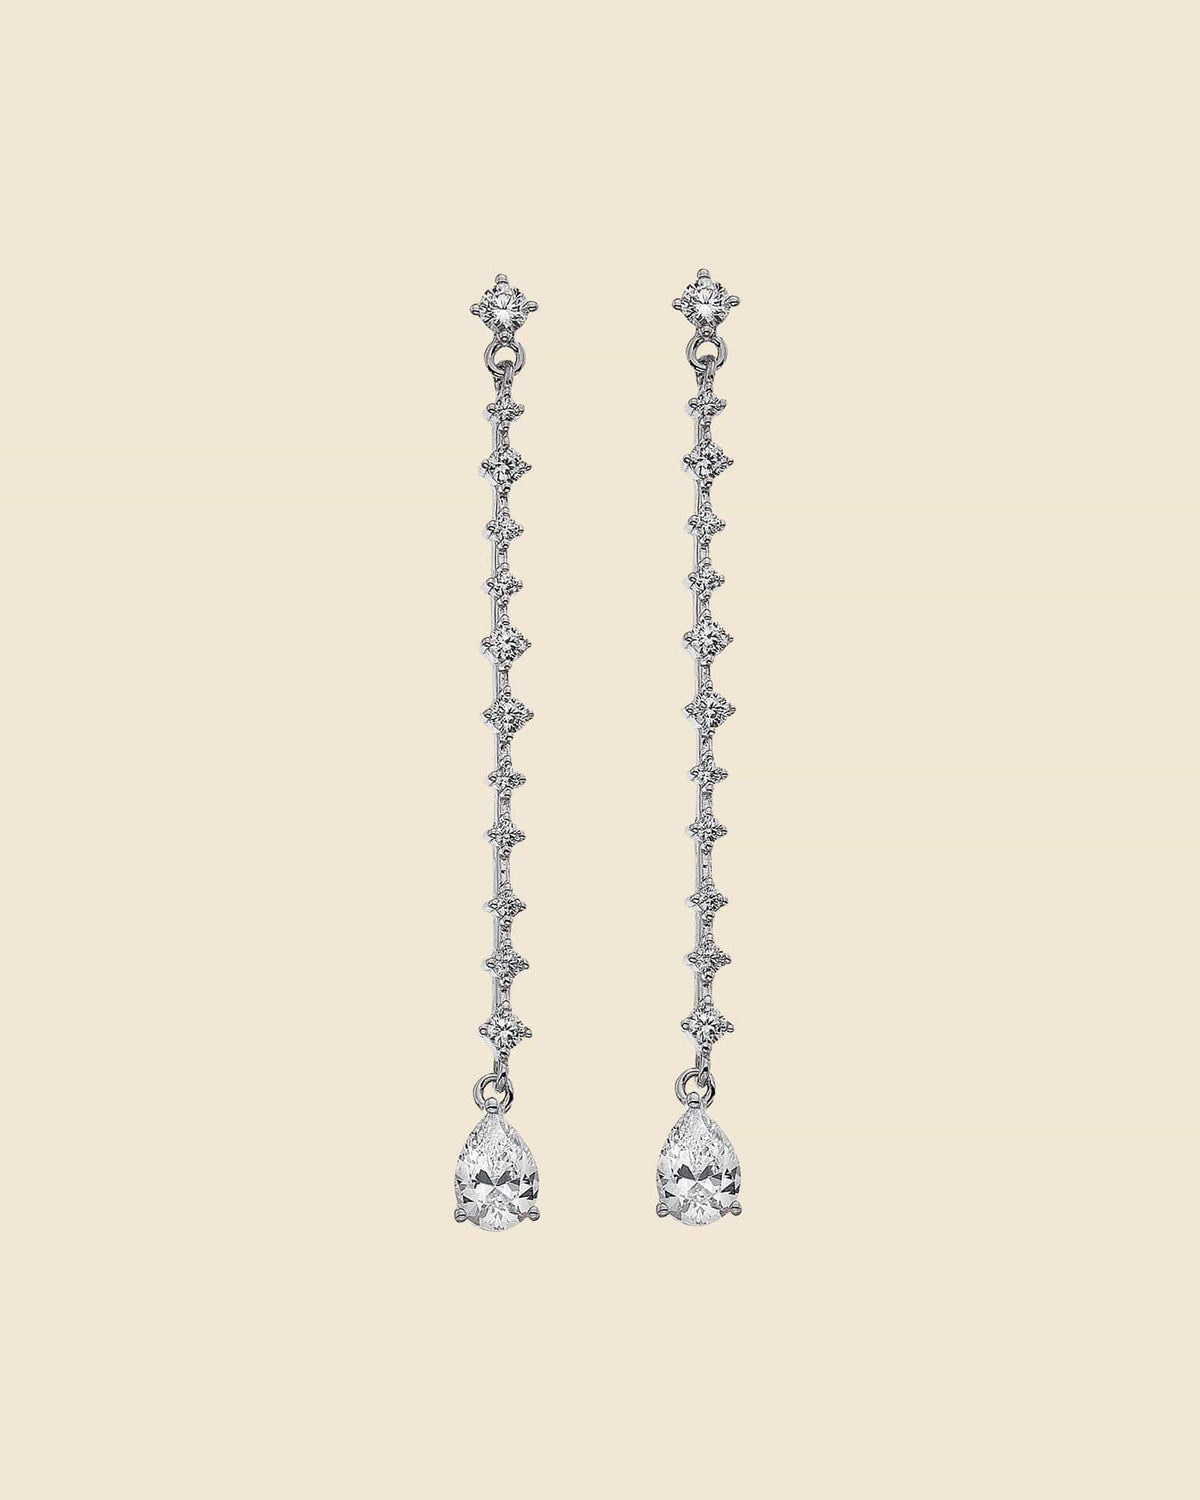 Sterling Silver and Cubic Zirconia Dewdrop Earrings